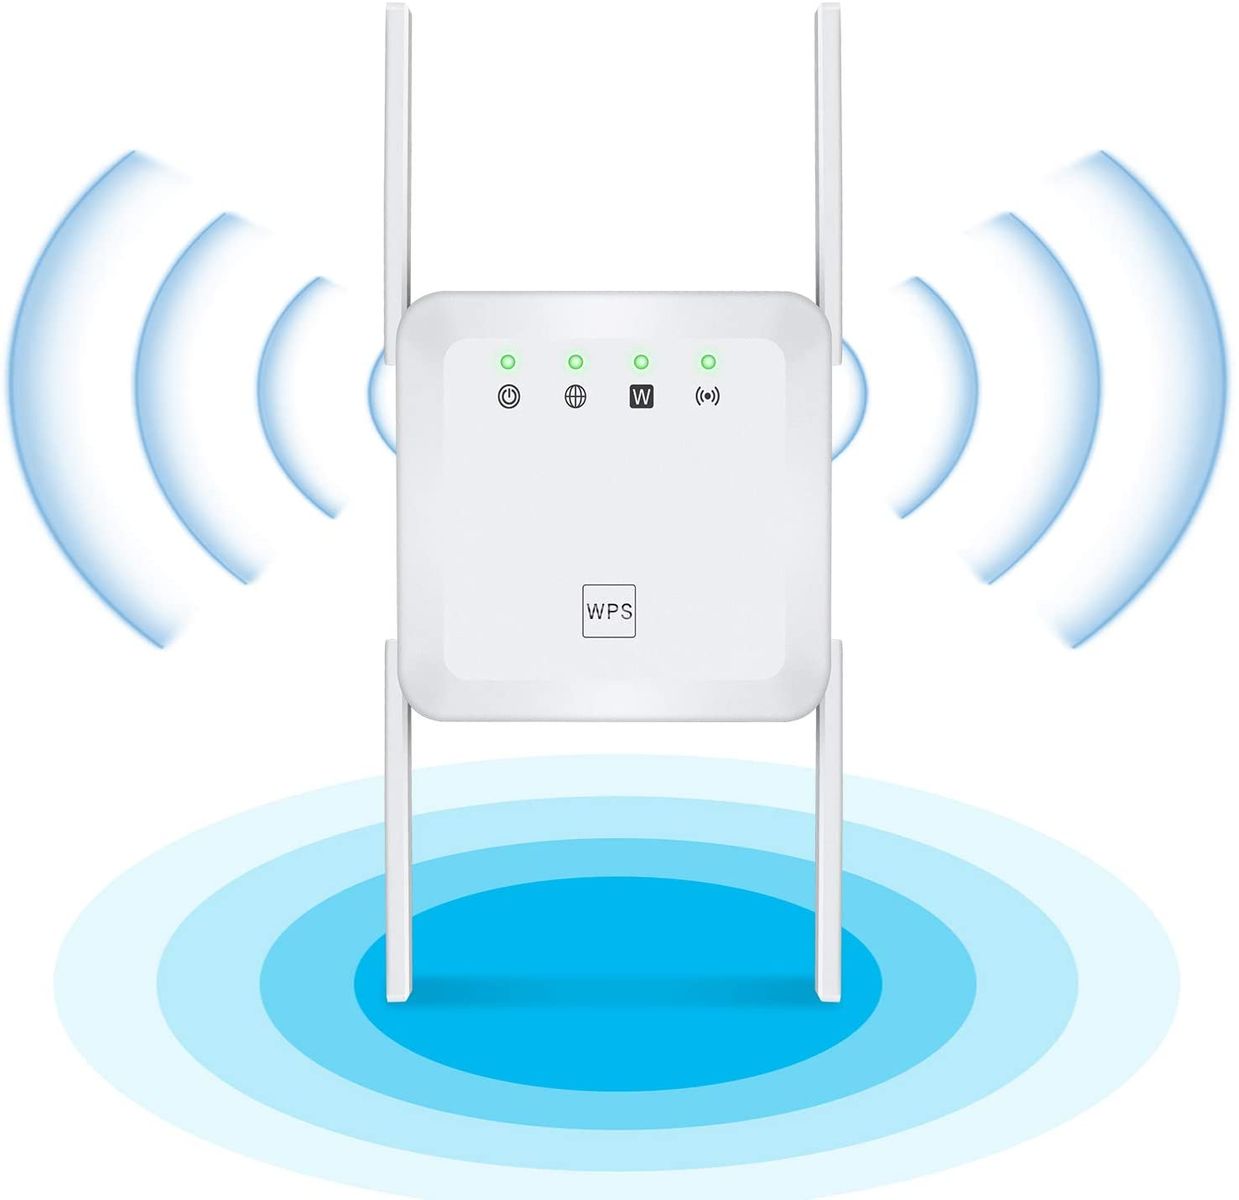 Agedate WLAN Amplifier WLAN Repeater 1200Mbps DualBand (5G/867Mbps+2.4G/300Mbps) WiFi Extender 4 Antennas 360 Full Coverage with AP/Repeater Mode